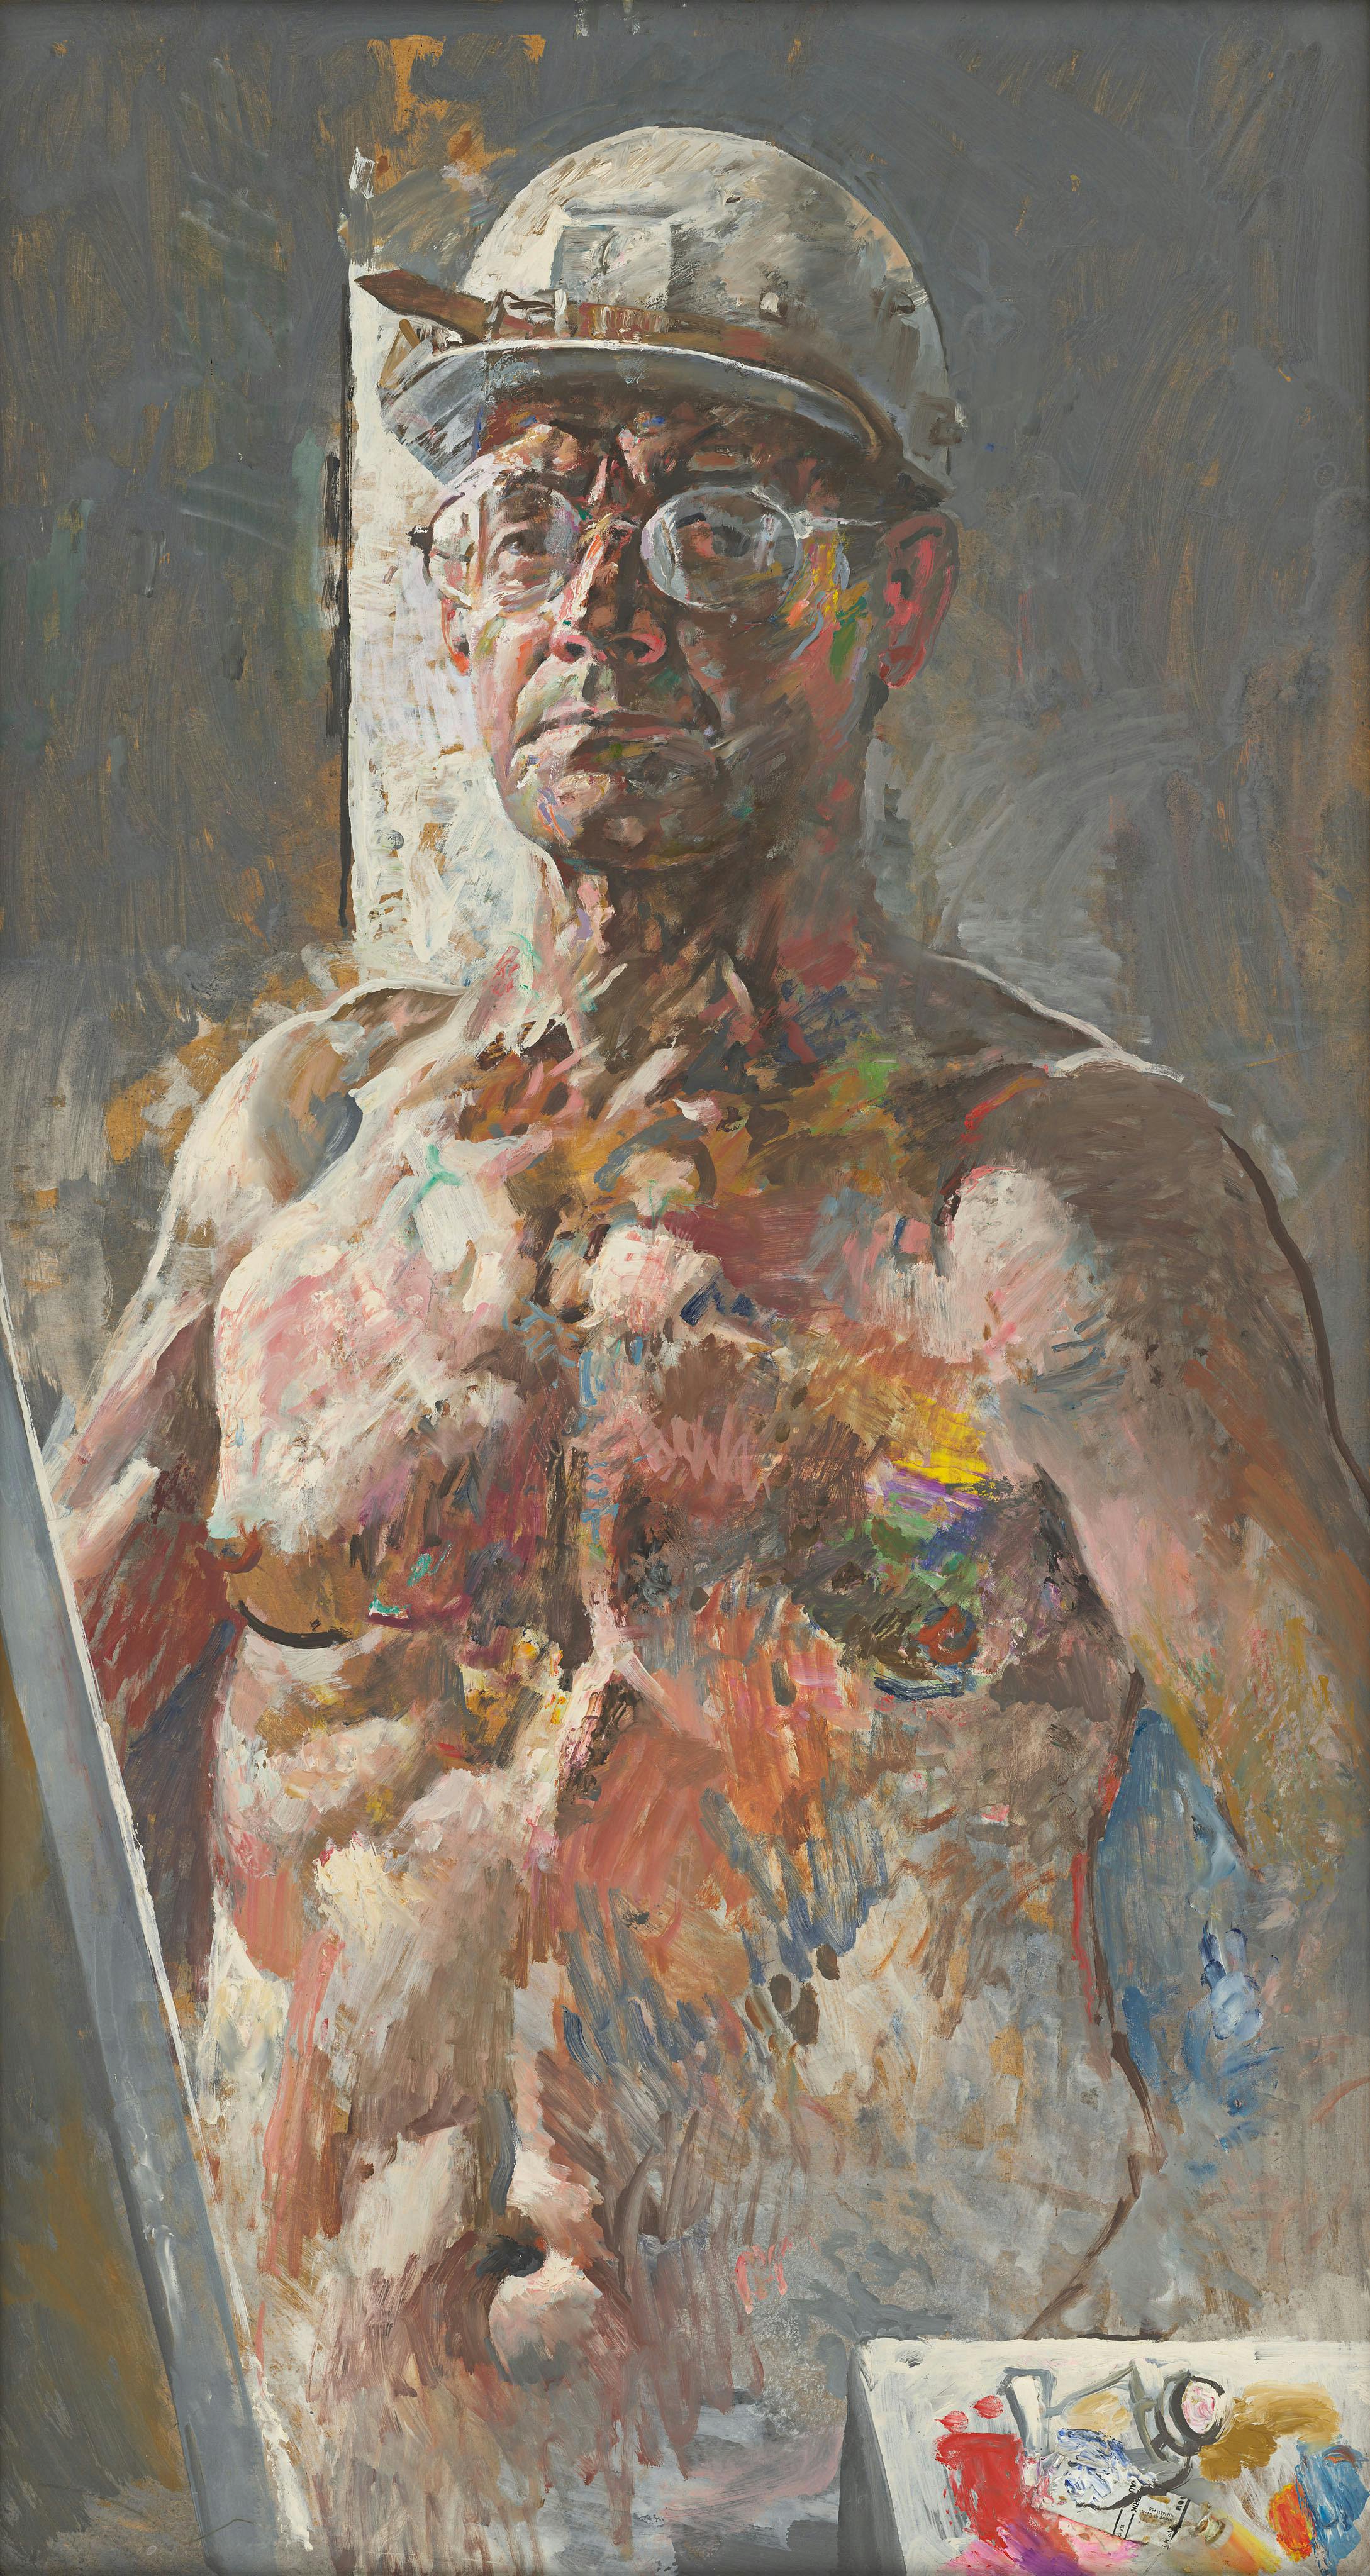 Painting: an undressed man is depicted with loose brushstrokes in a frontal view up to waist height. He wears a construction worker's helmet and holds a paint tube in his hand.